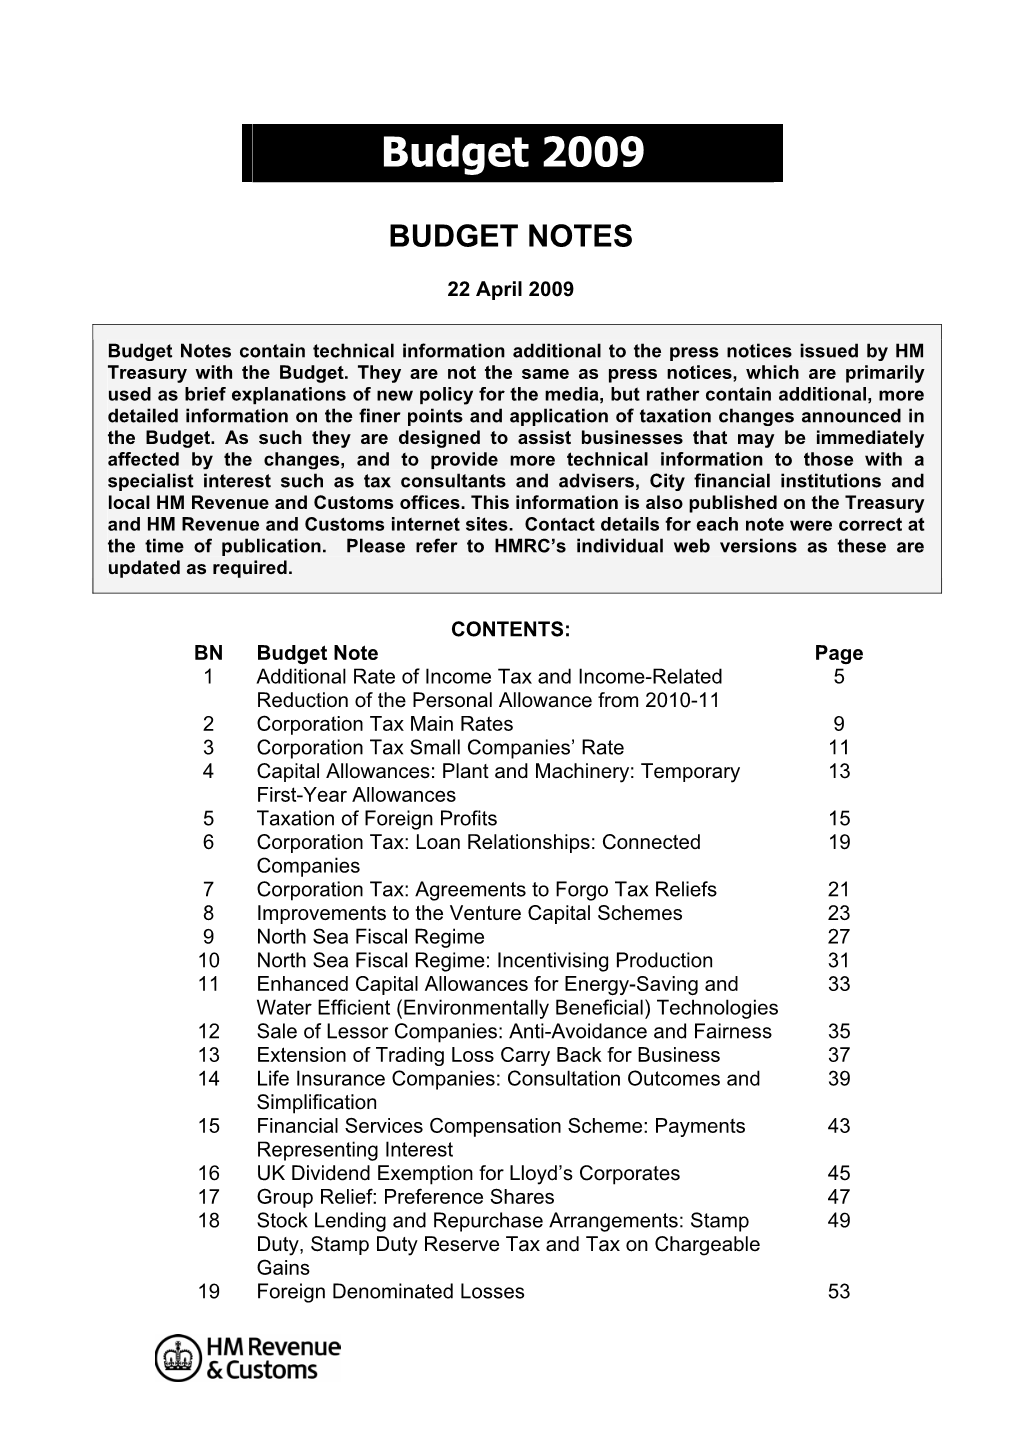 Budget Notes